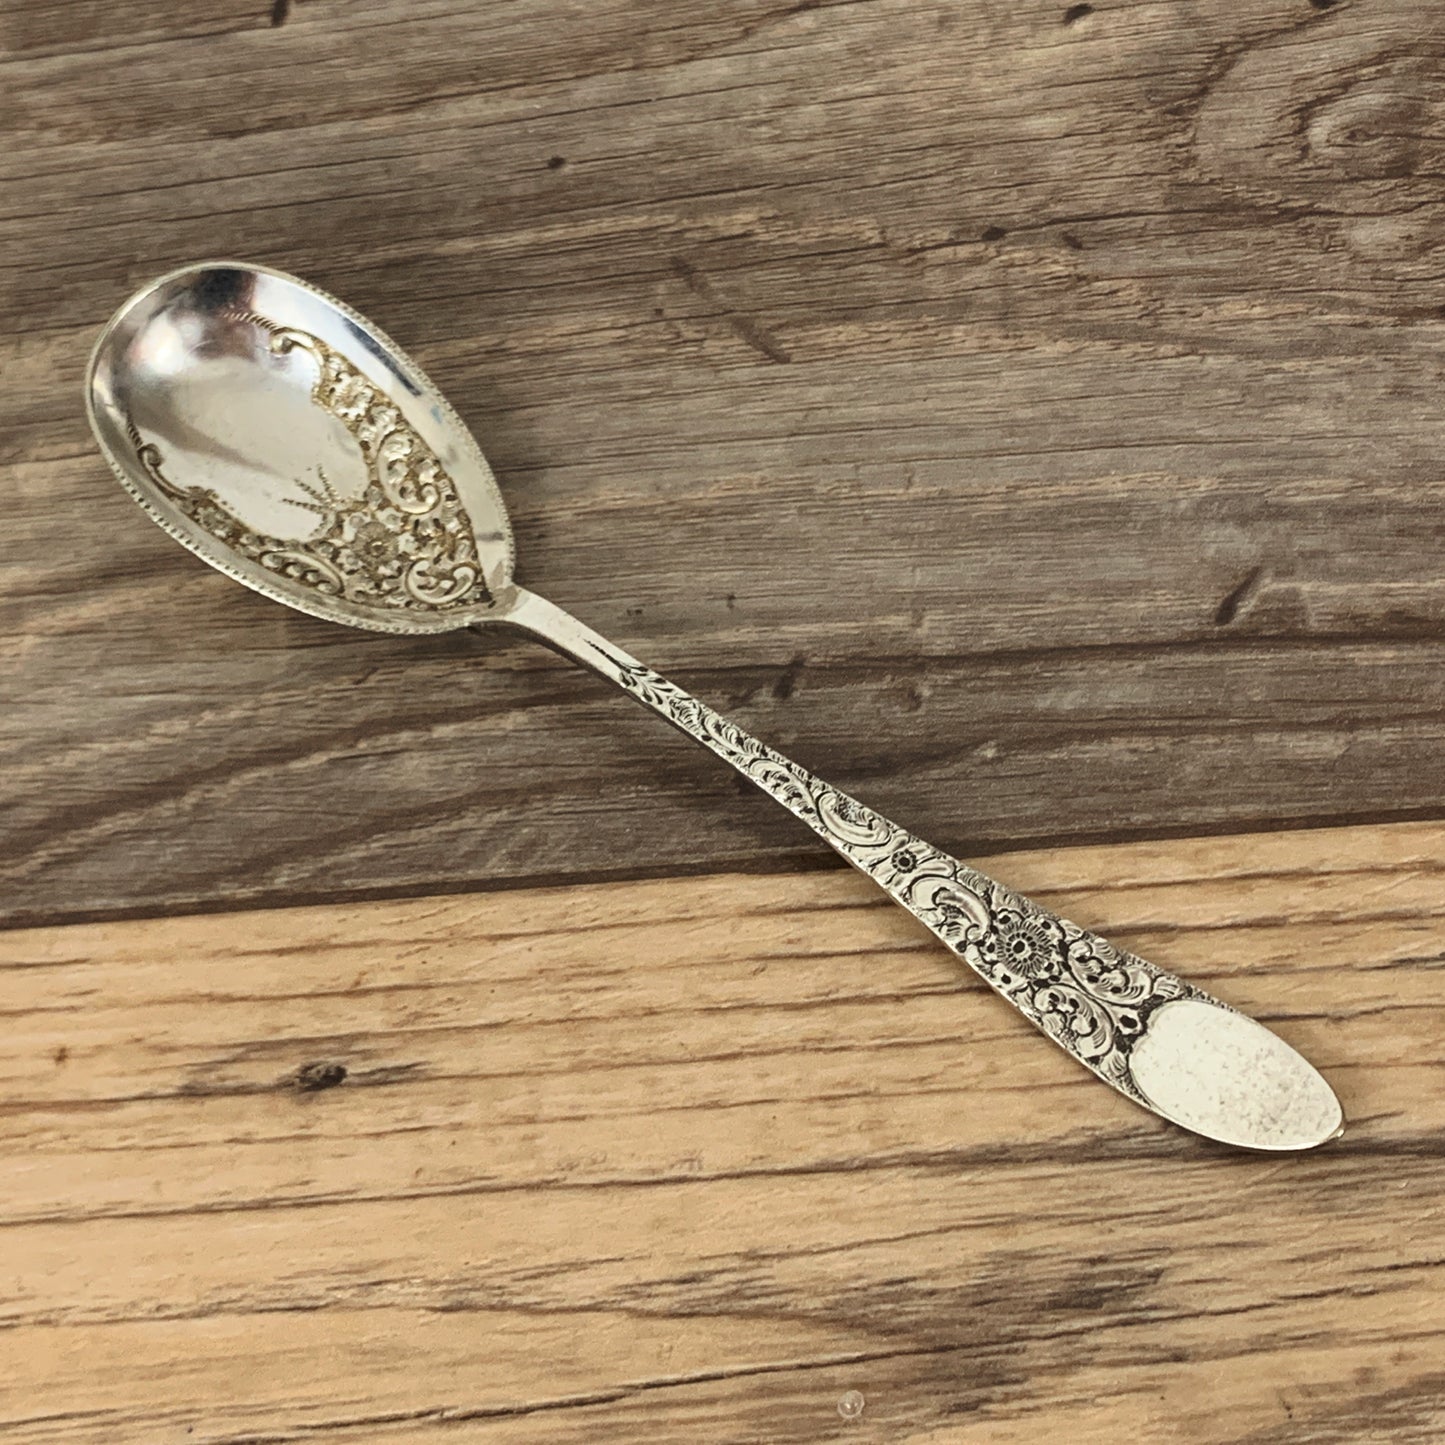 Vintage Silver Plated Spoon with Decorative Handle and Bowl